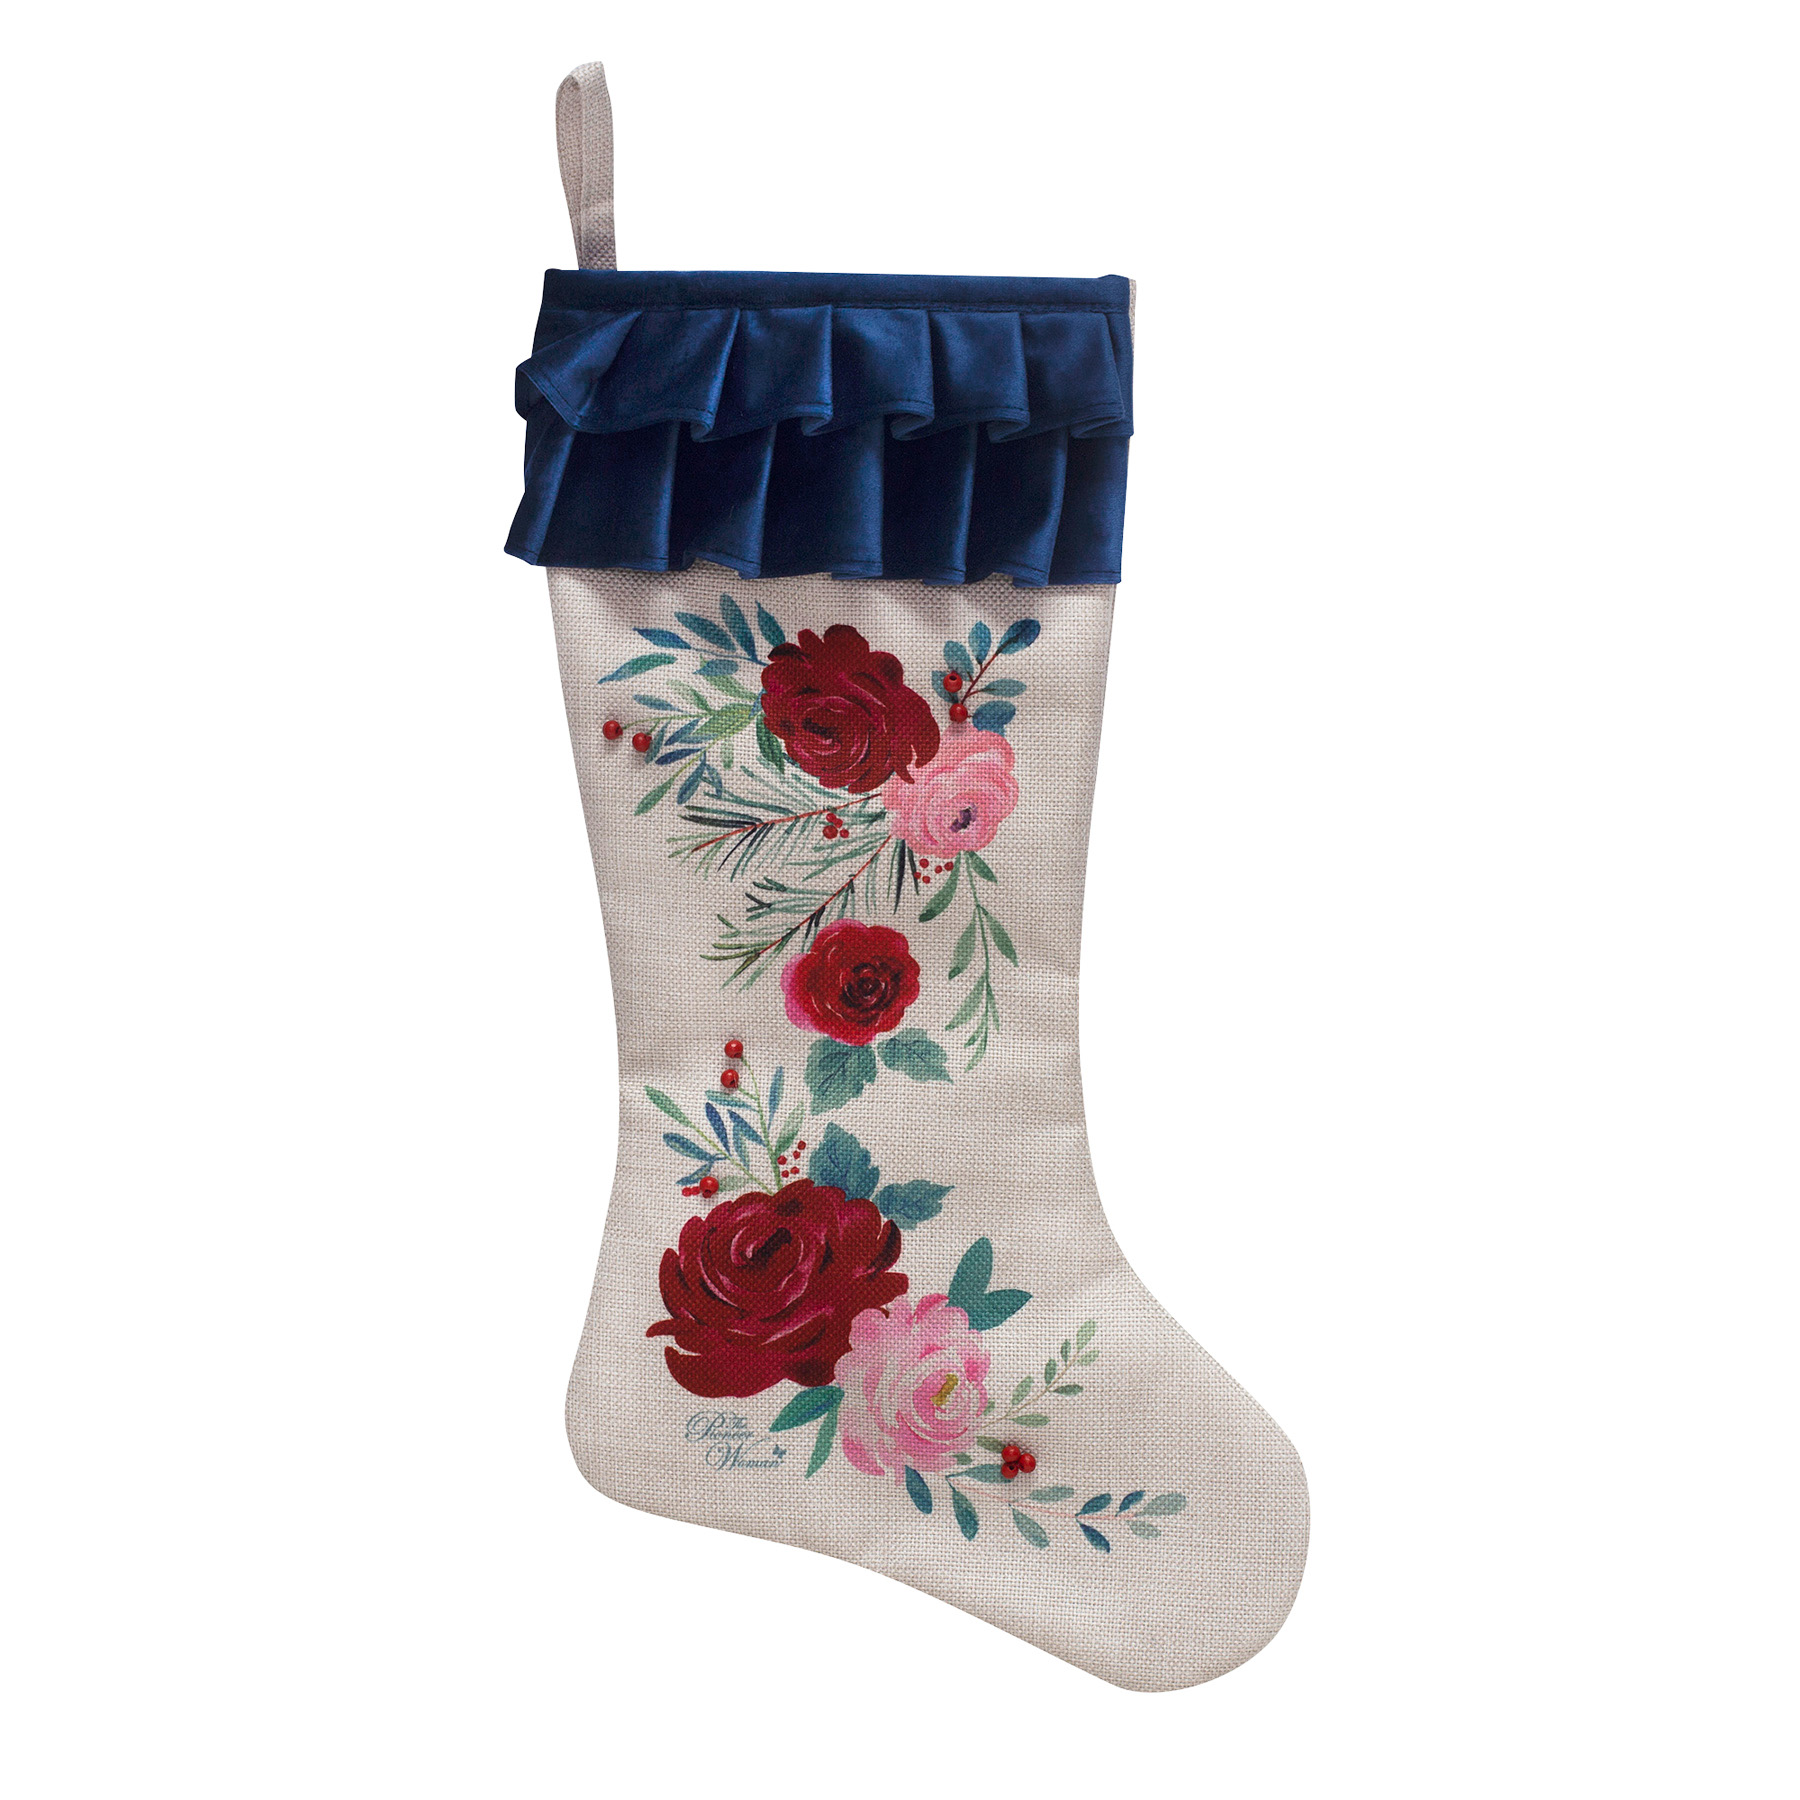 The Pioneer Woman Set of 2 Red Roses Ruffle Christmas Stockings, 20" - image 5 of 9